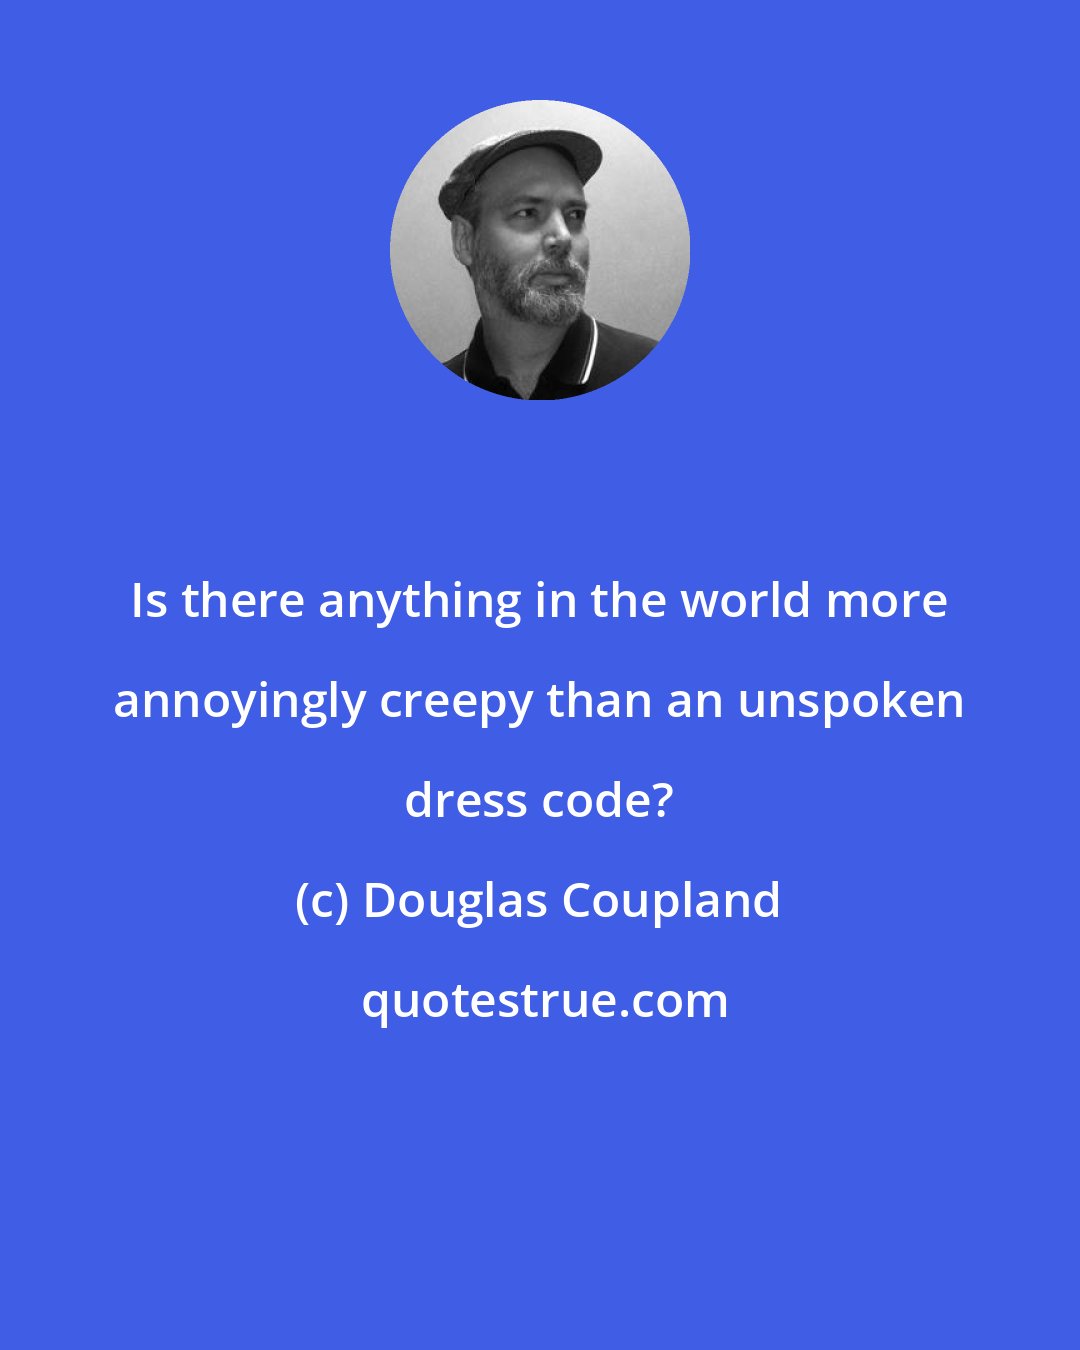 Douglas Coupland: Is there anything in the world more annoyingly creepy than an unspoken dress code?